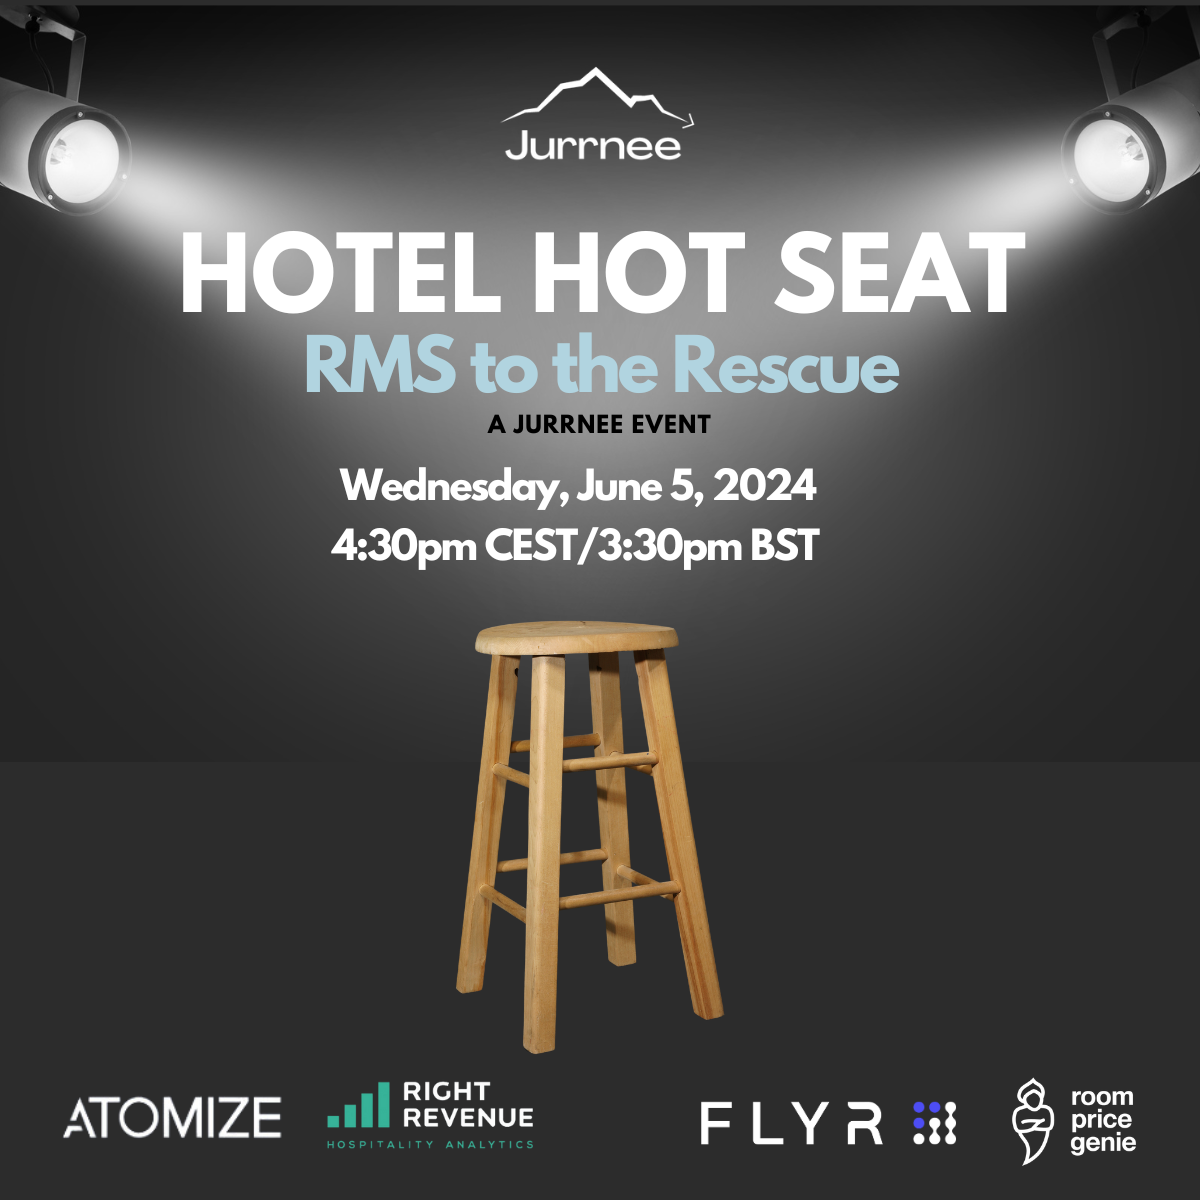 HOTEL HOT SEAT: RMS to the Rescue - DAY 1